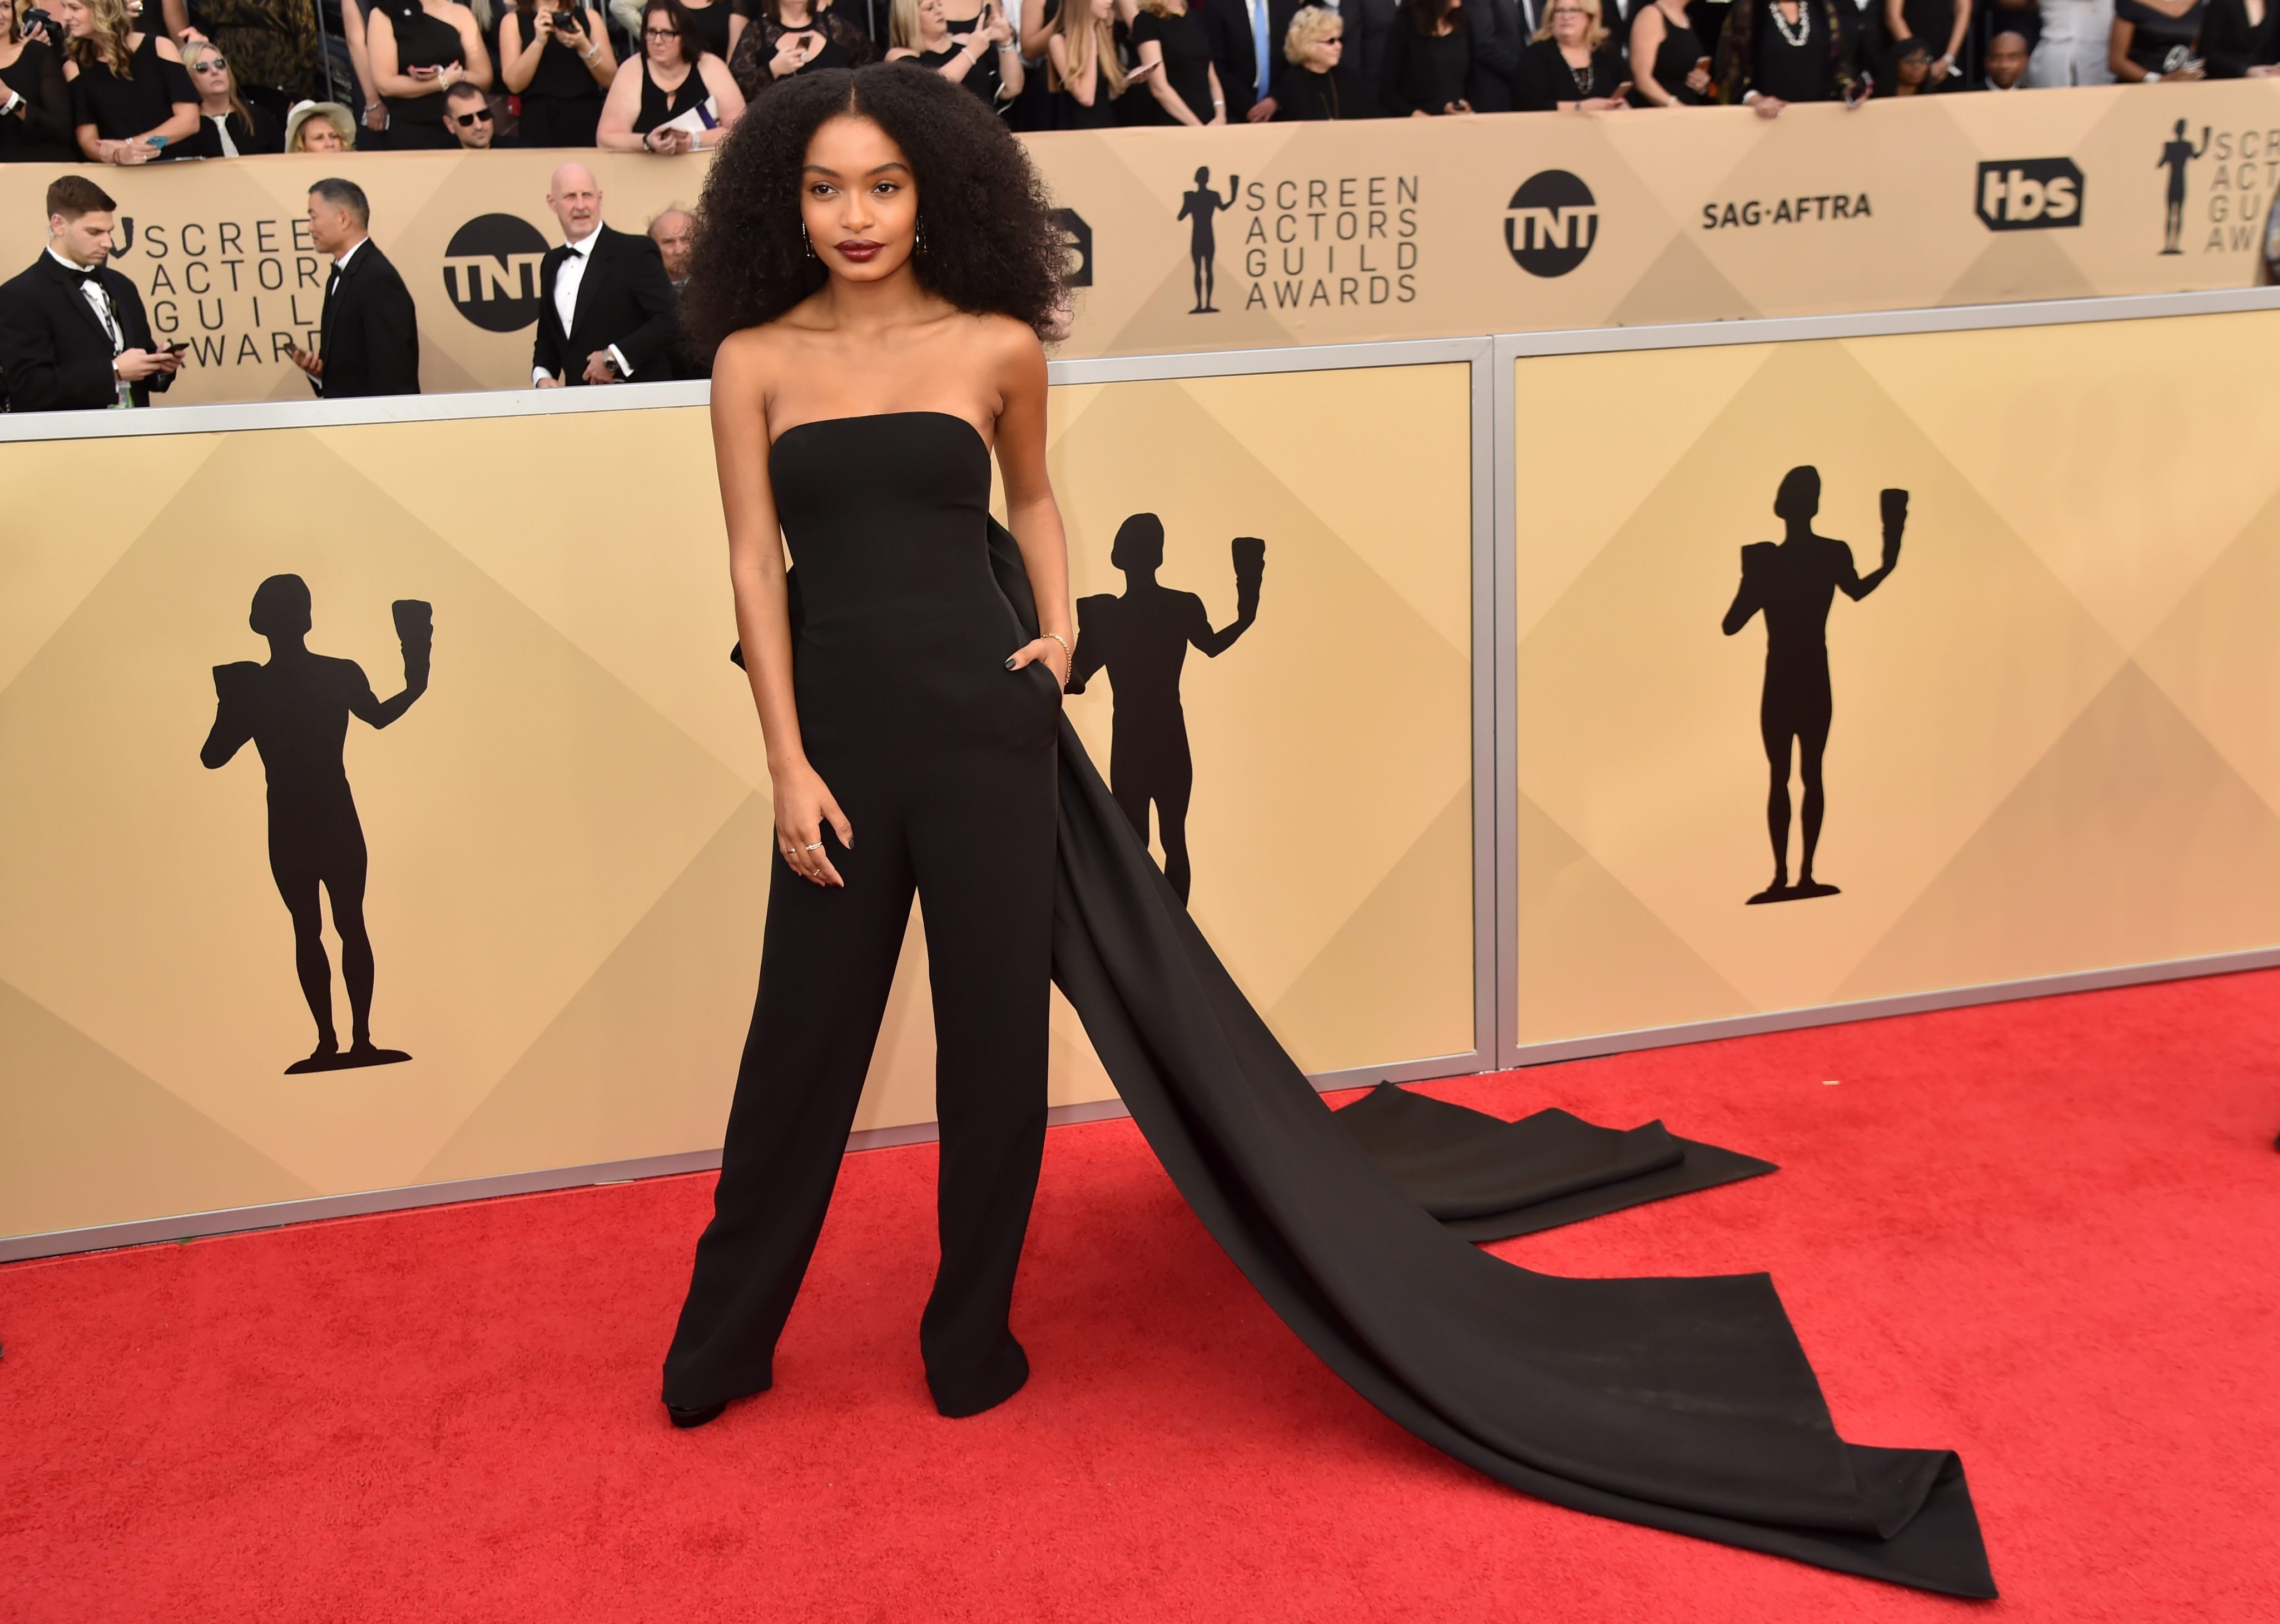 Amazing Looks from the Screen Actors Guild Awards Red Carpet - Magazine